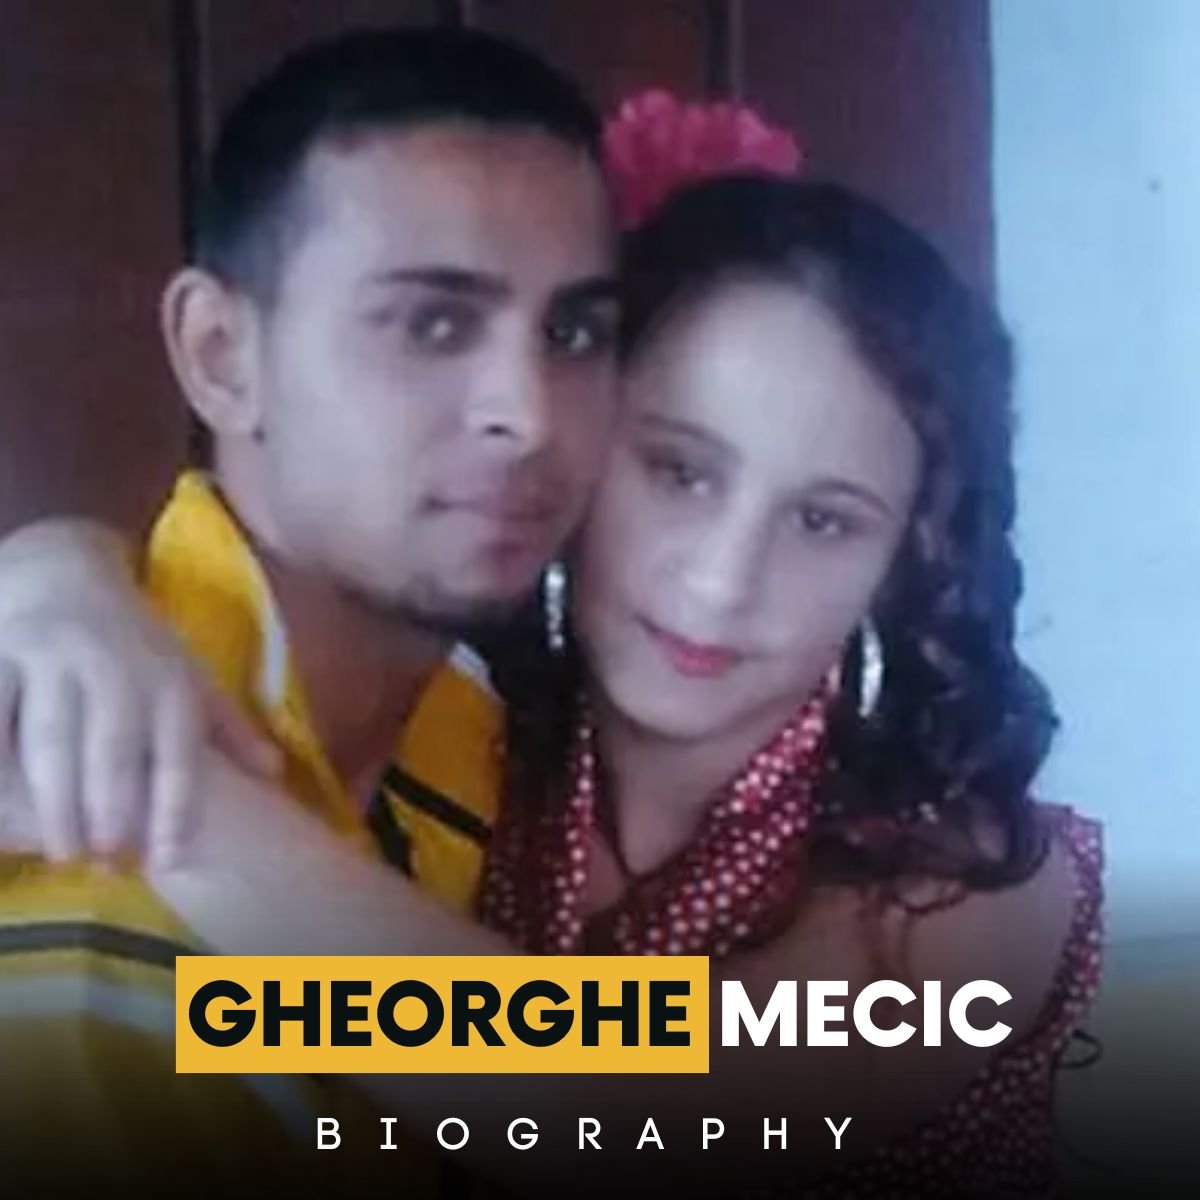 Gheorghe Mecic Bio: What Happened to Him After Becoming a Father at 13?